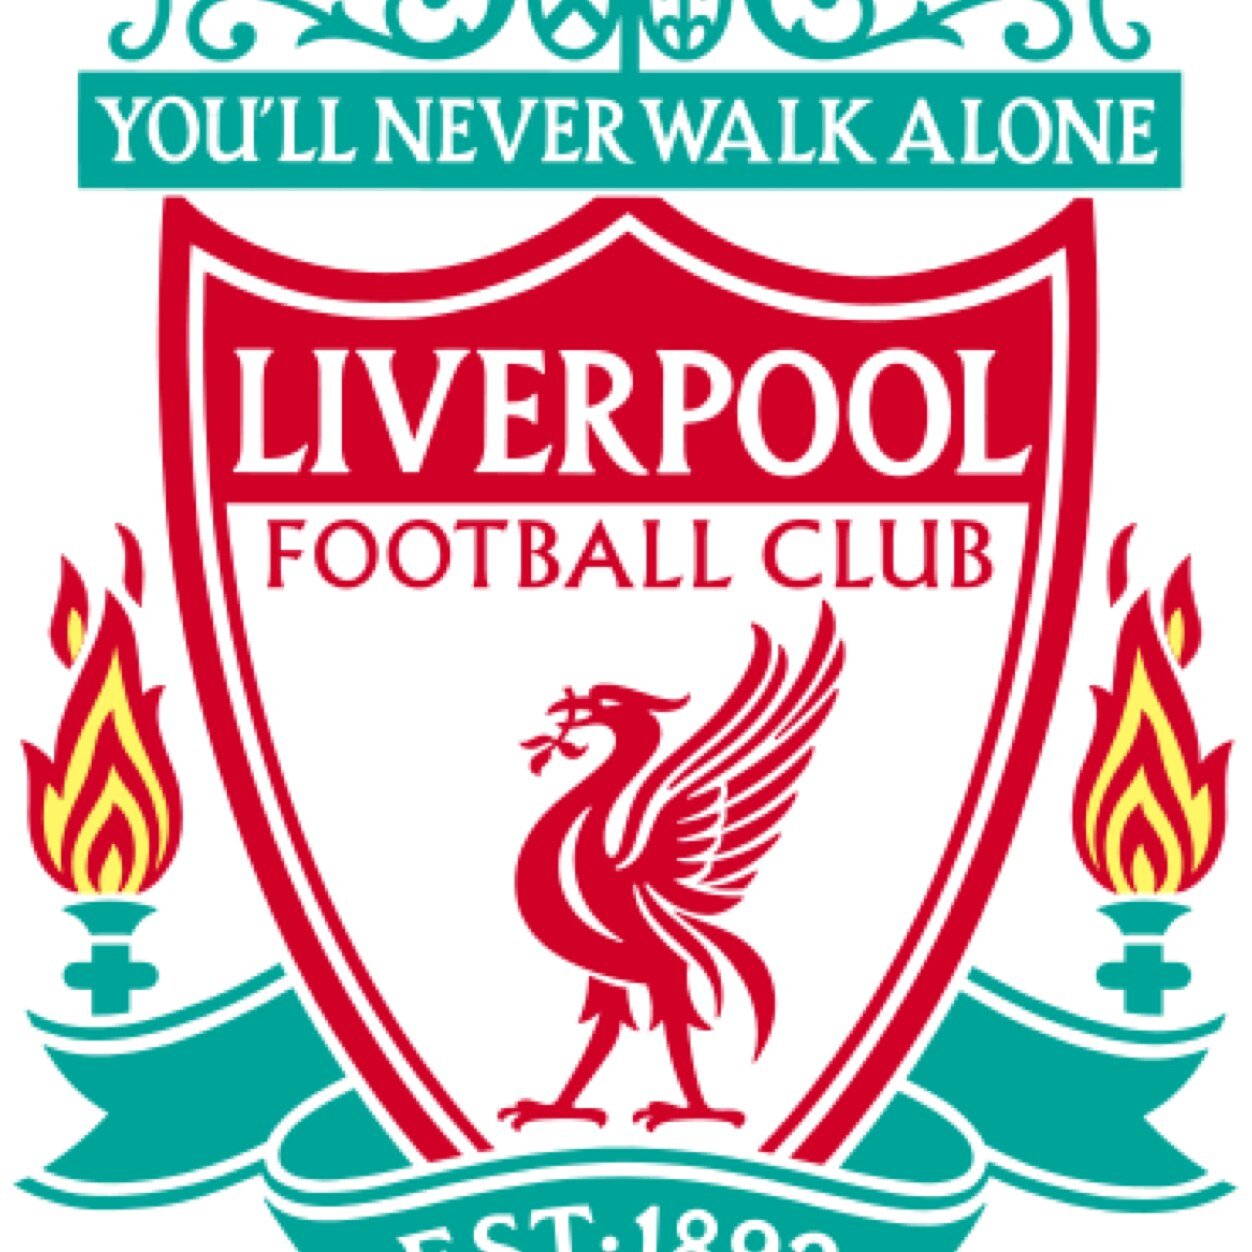 We Are Liverpool. Make Us Dream. Liverpool supporter. Can we win the league? Of course we can.